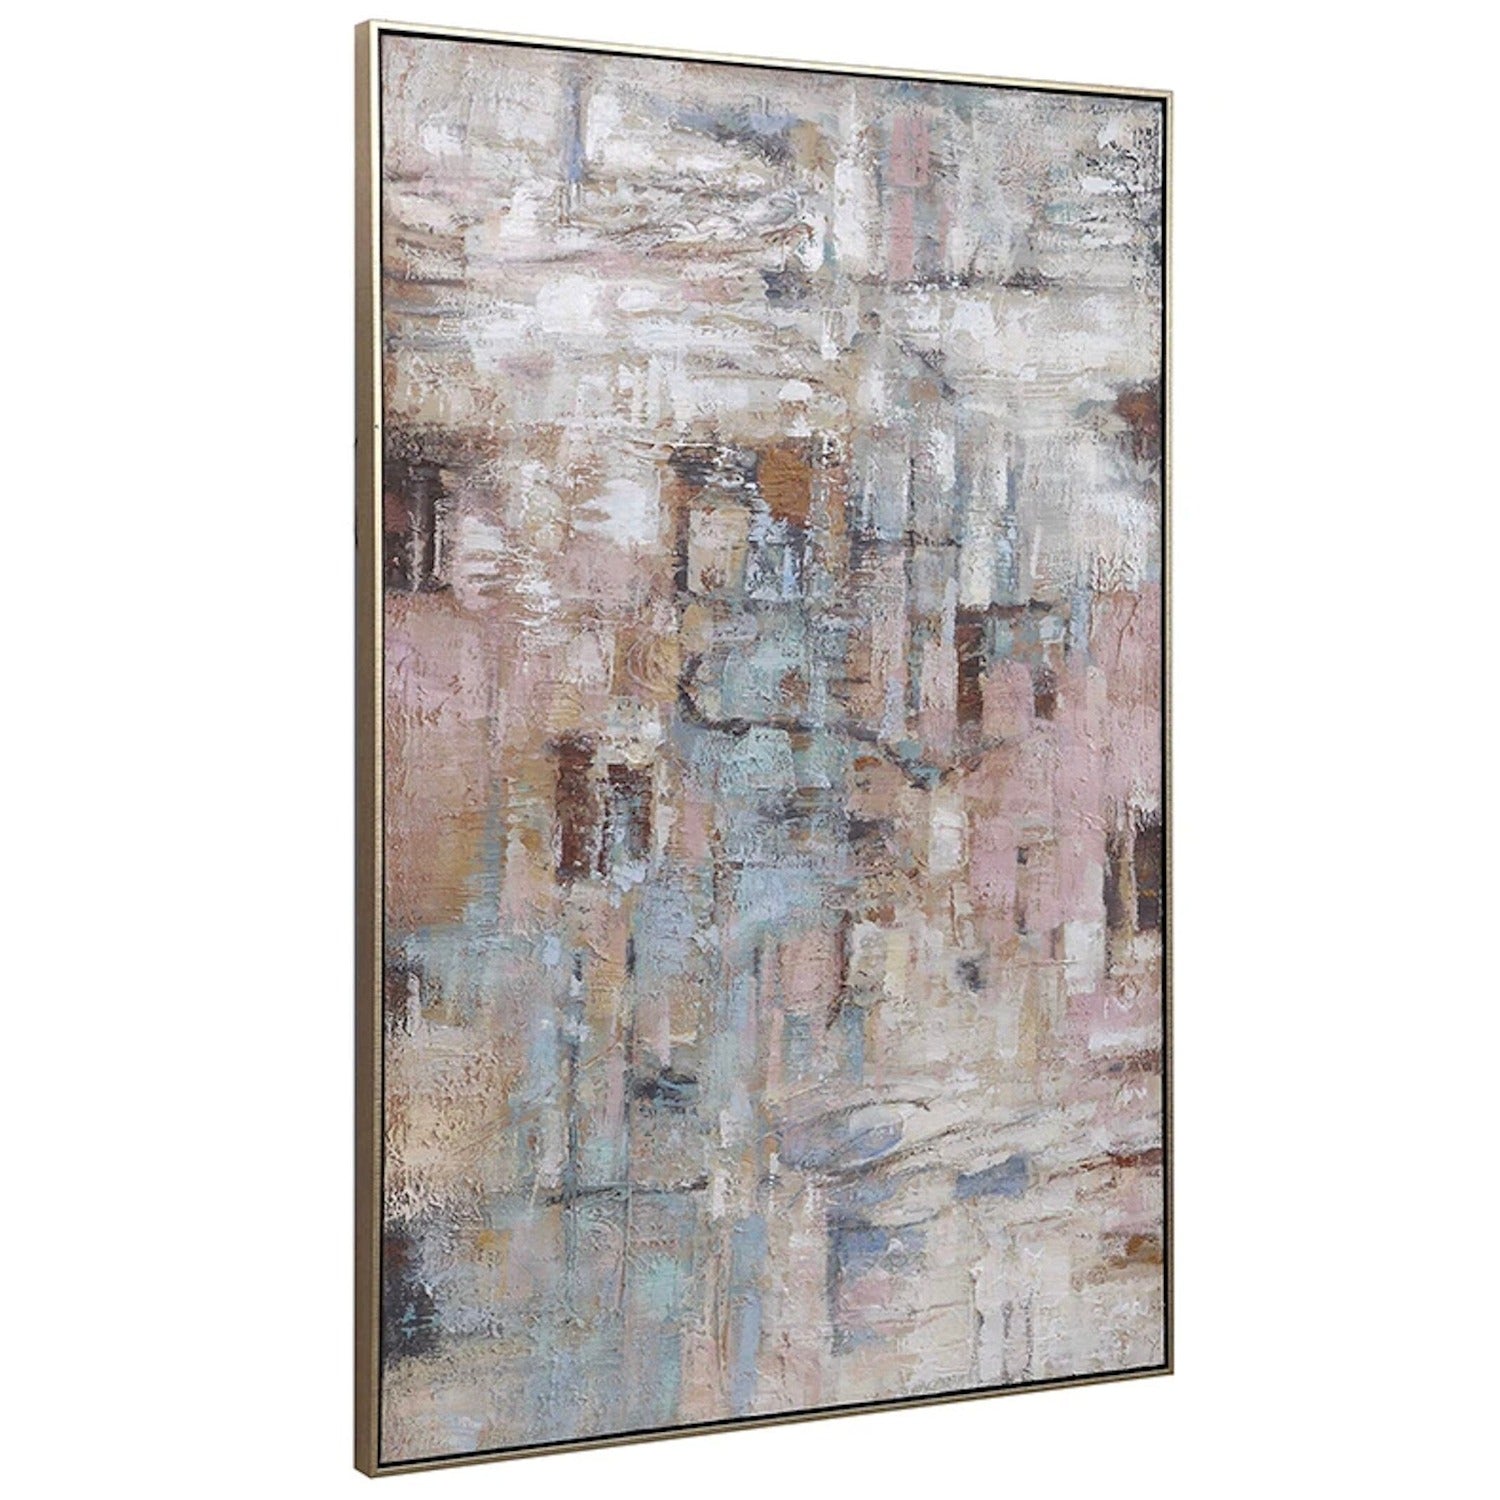 Delicate 100% Hand Painted Abstract Oil Painting